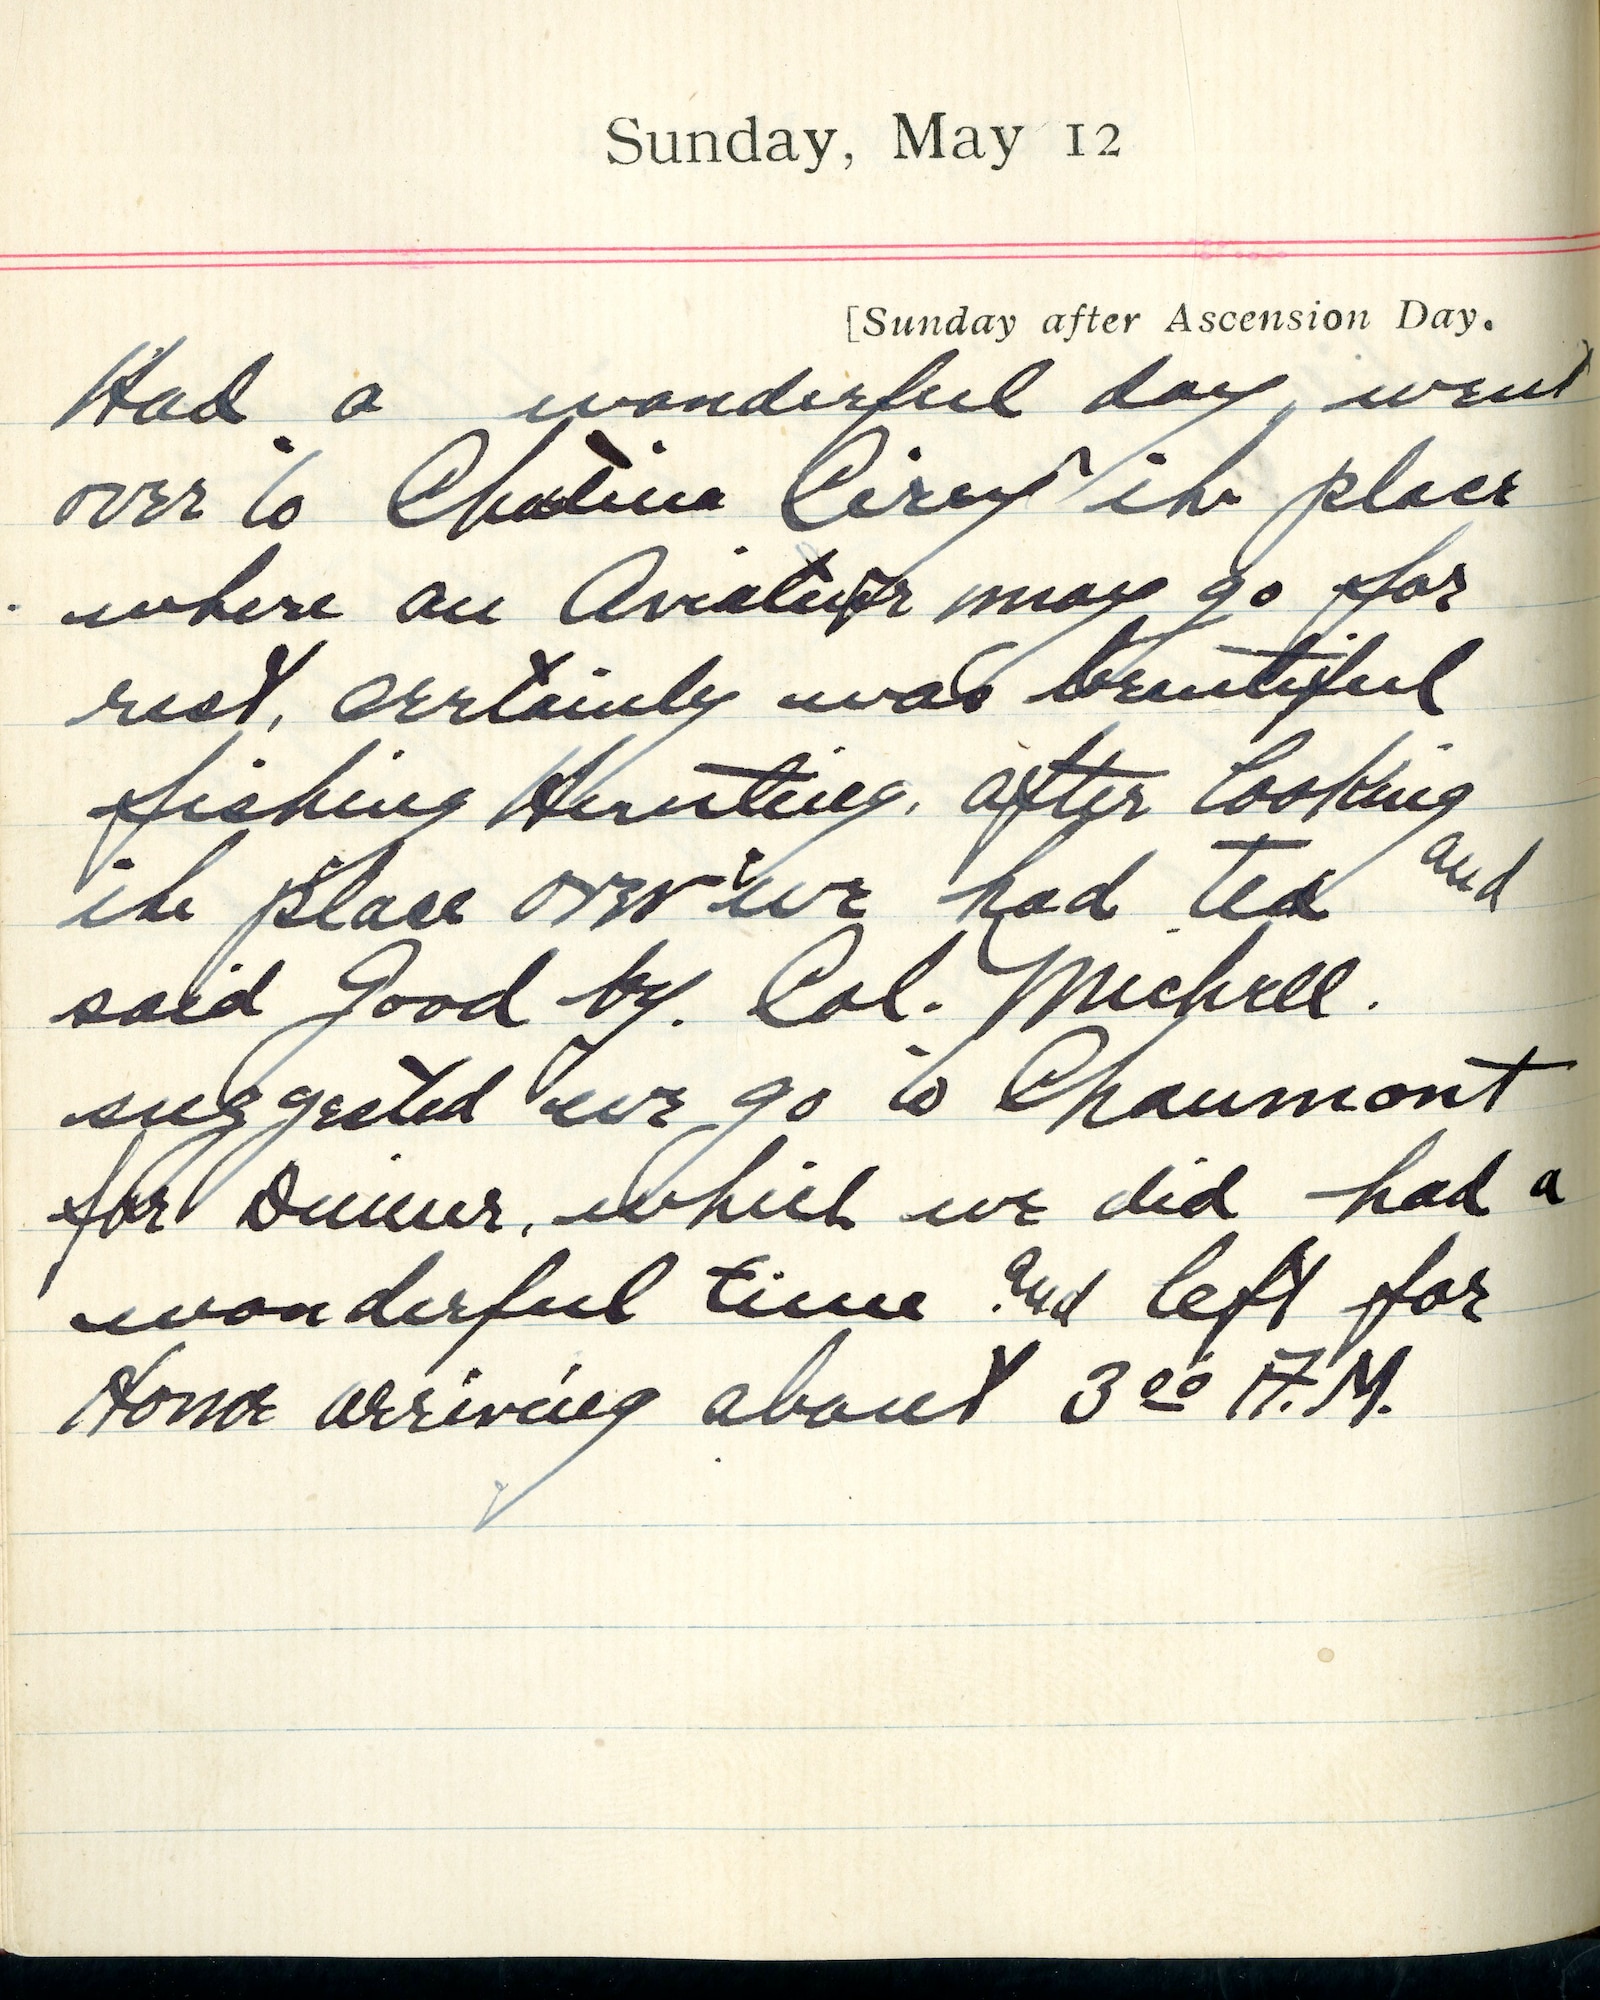 Capt. Edward V. Rickenbacker's 1918 wartime diary entry. (05/12/1918).

Had a wonderful day.  Went over to Chateau Cirey, the place where an aviator may go for rest.  Certainly was beautiful fishing, hunting.  After looking the place over we had tea and said goodbye.  Col. Mitchell suggested we go to Chaumont for dinner, which we did.  Had a wonderful time and left for home arriving about 3:00 A.M.